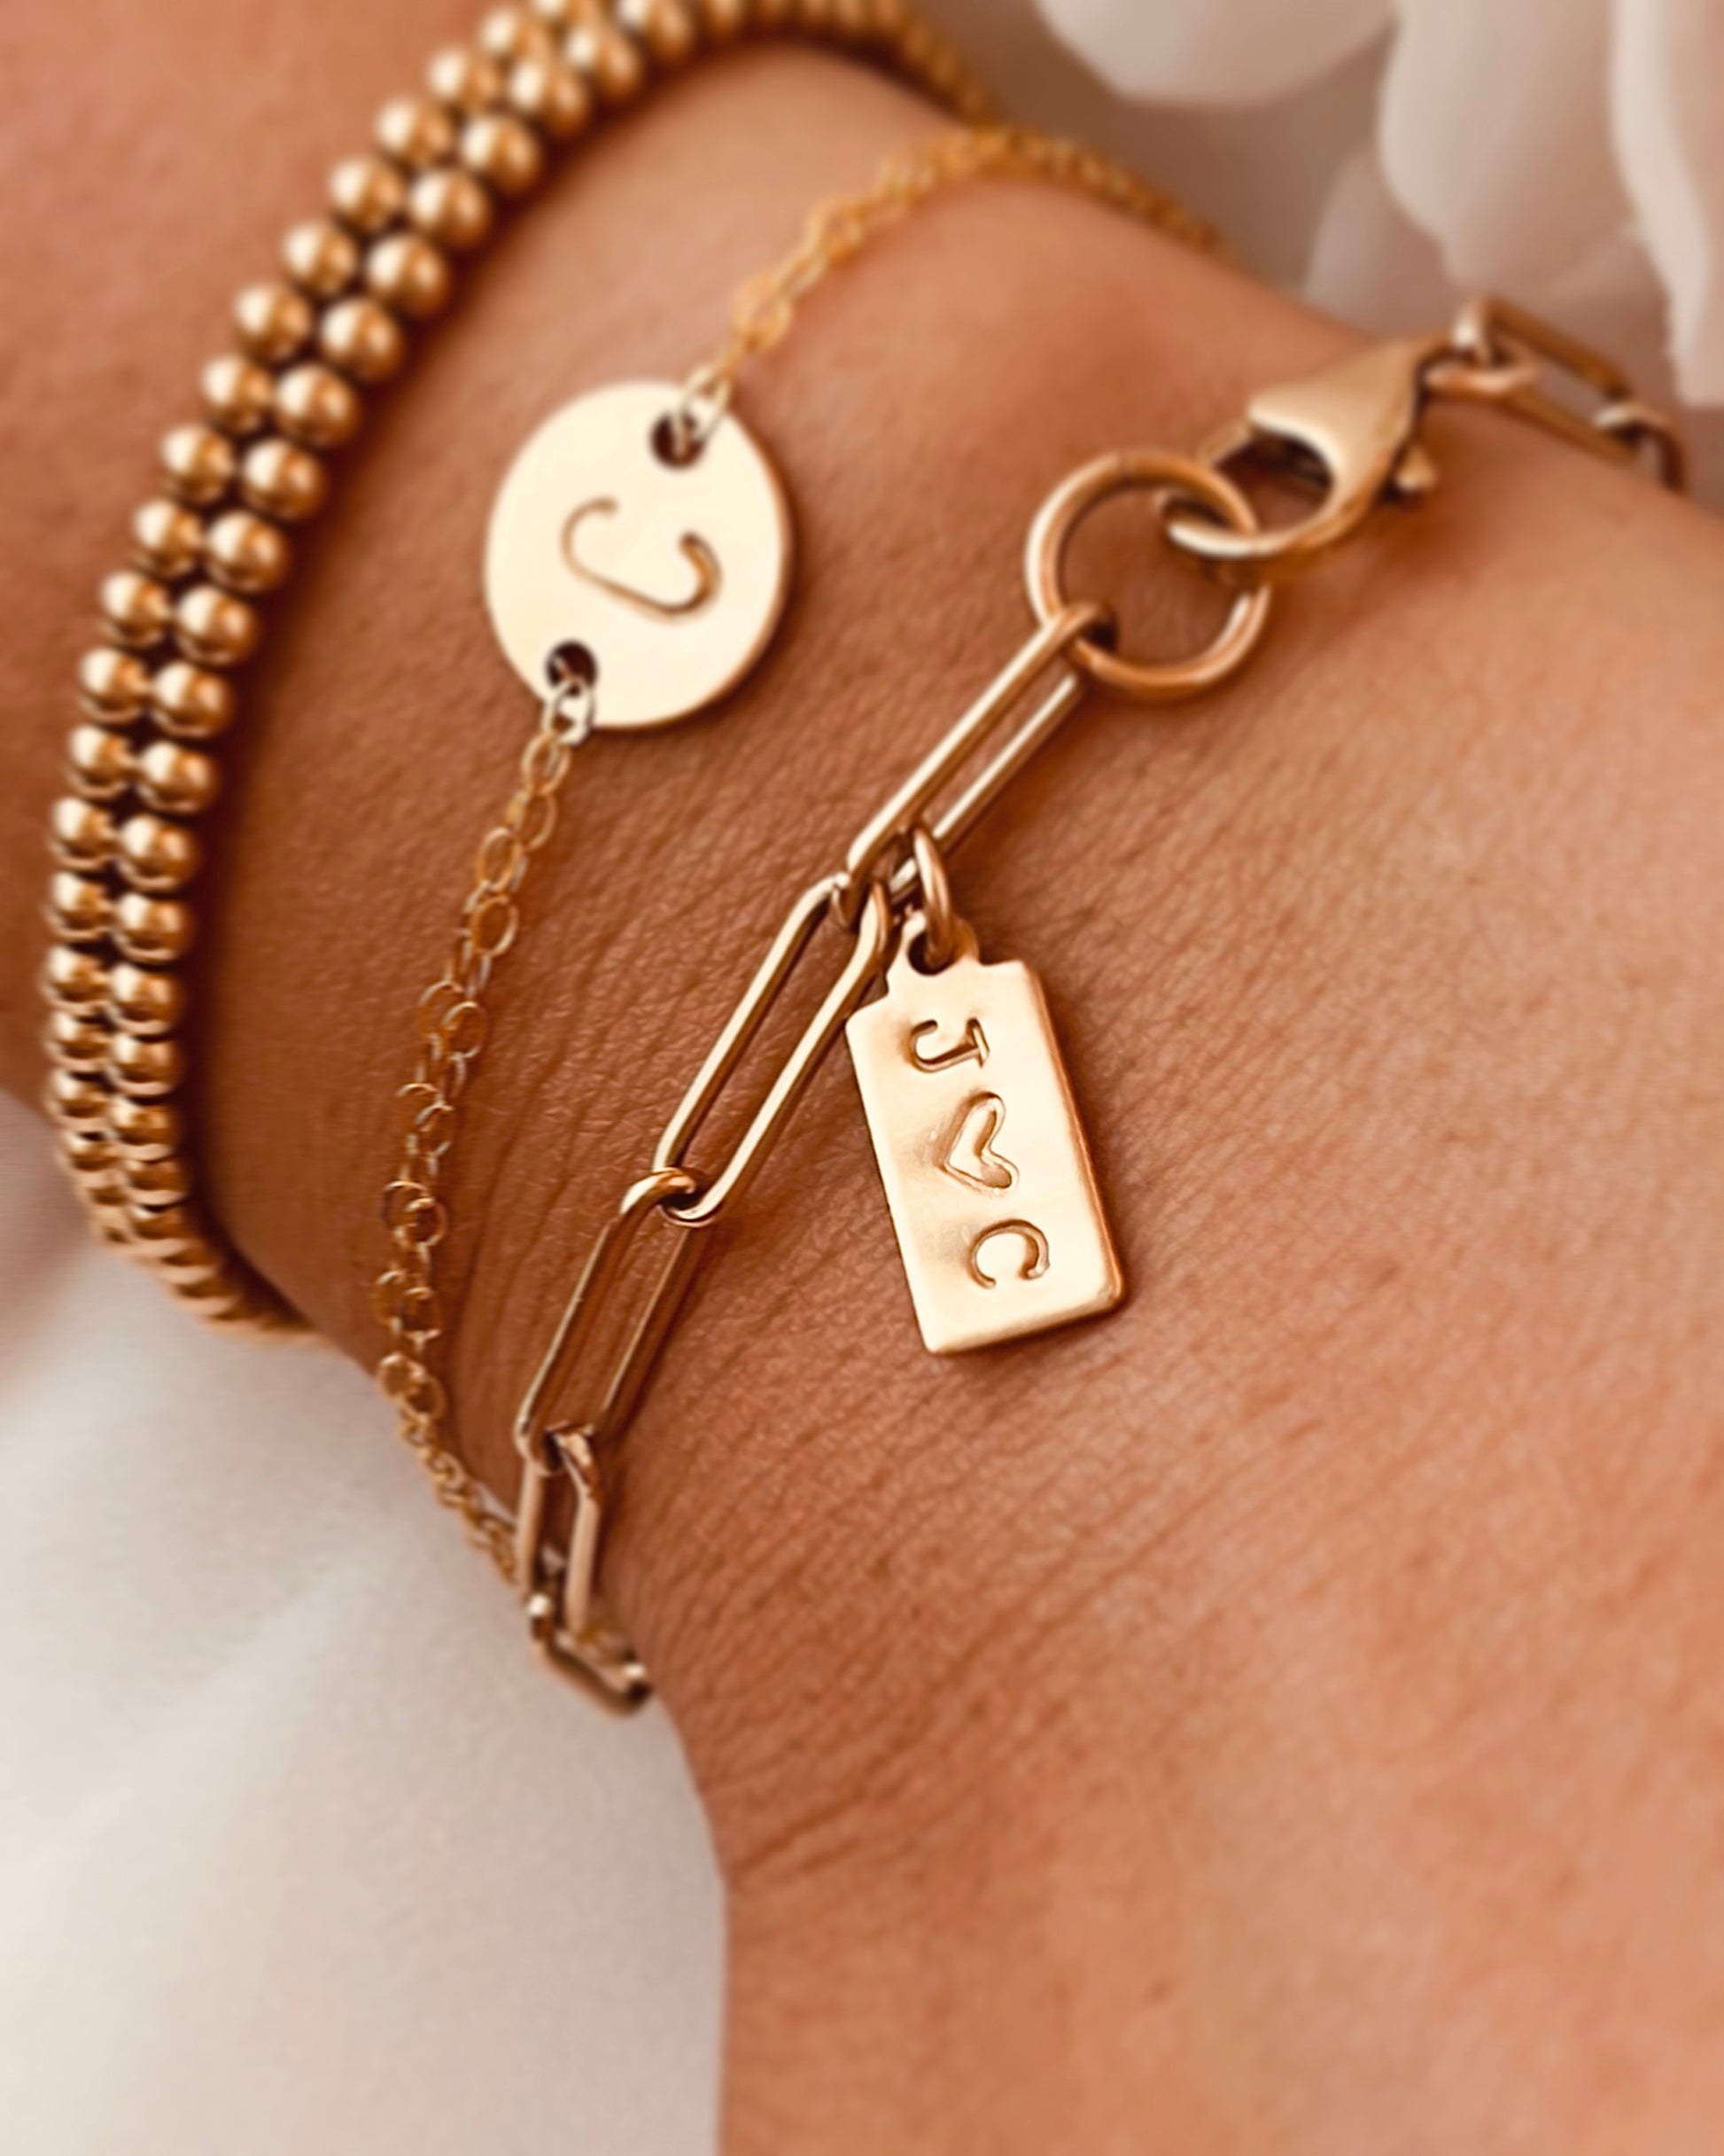 Paperclip Tag Initial Bracelet, Initial Bracelet, Personalized Tag with Initial, Custom Tag Bracelet, Paperclip Bracelet, Stack Bracelet, In silver and Gold , Valentines Day